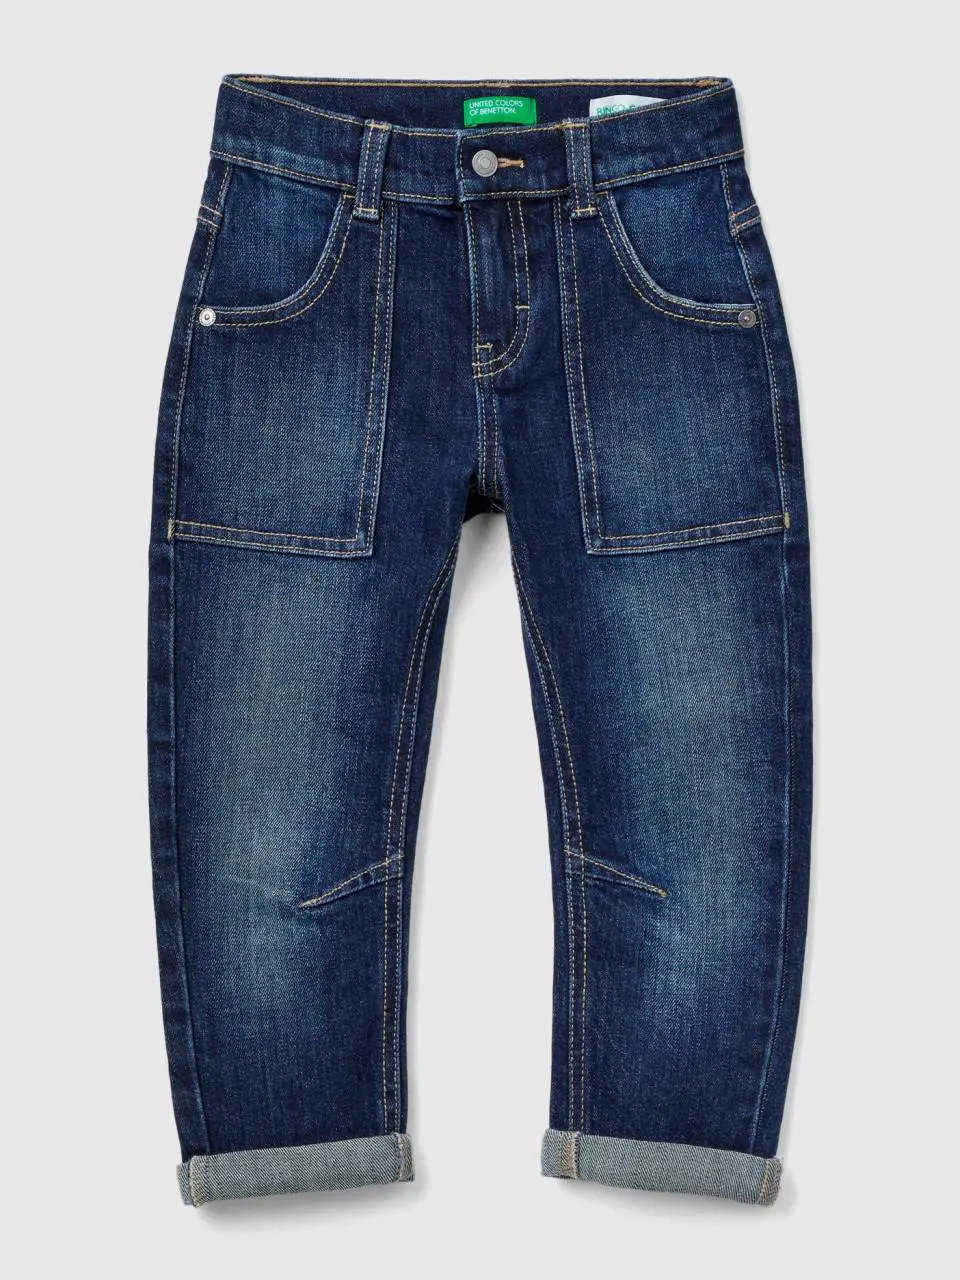 Benetton carrot fit jeans. 1